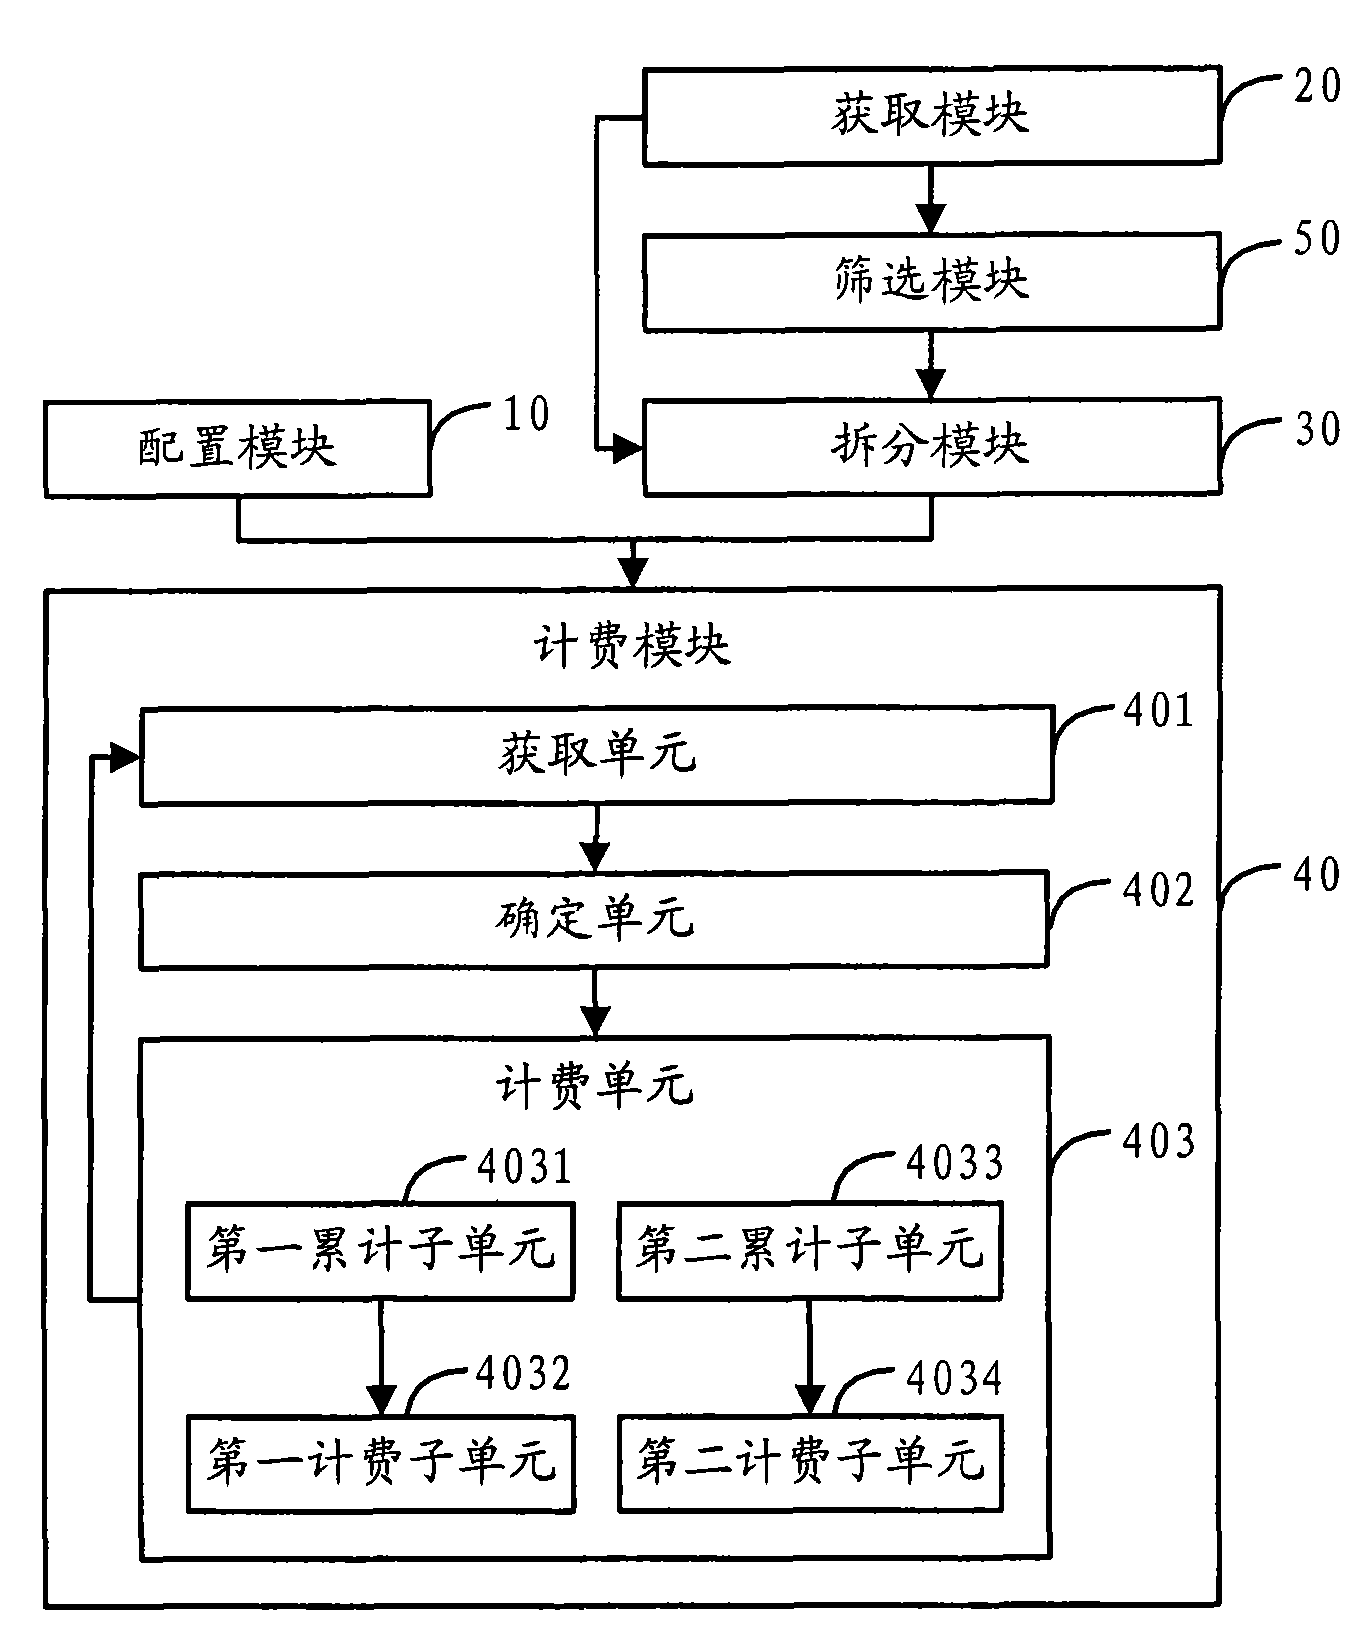 Charging method and device of mobile data services